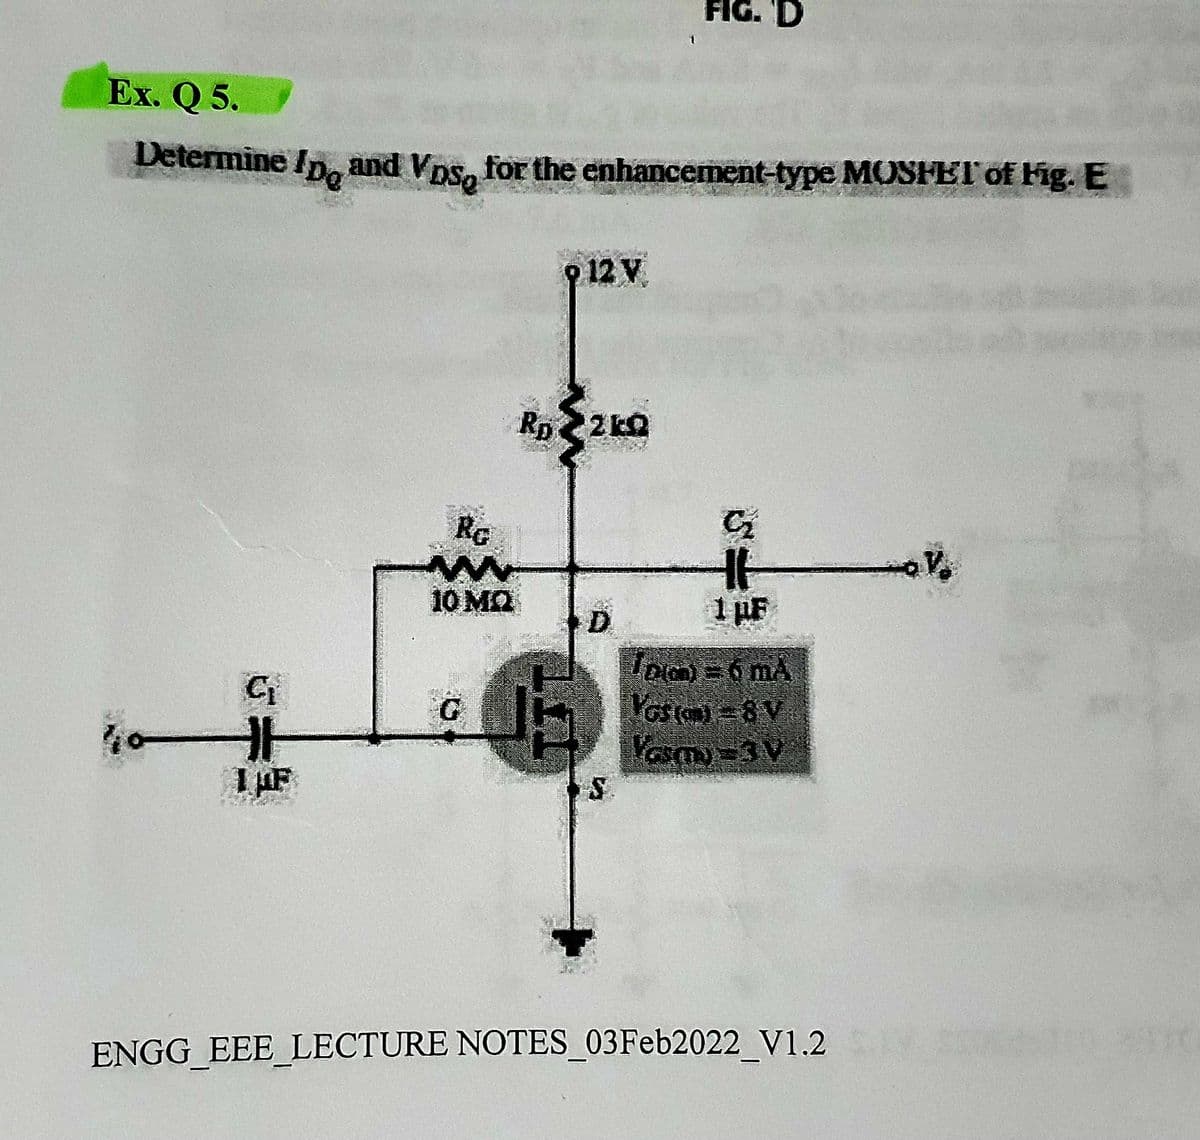 FIG. 'D
Ex. Q 5.
Determine /p. and Vps, for the enhancement-type MOSFET of Fig. E
VpsQ
o 12 V
Rp2 kQ
RG
10 MQ
1 pF
D.
%23
1 uF
Yosa=8V
Vasmy =3V
ENGG_EEE_LECTURE NOTES_03Feb2022_ V1.2
